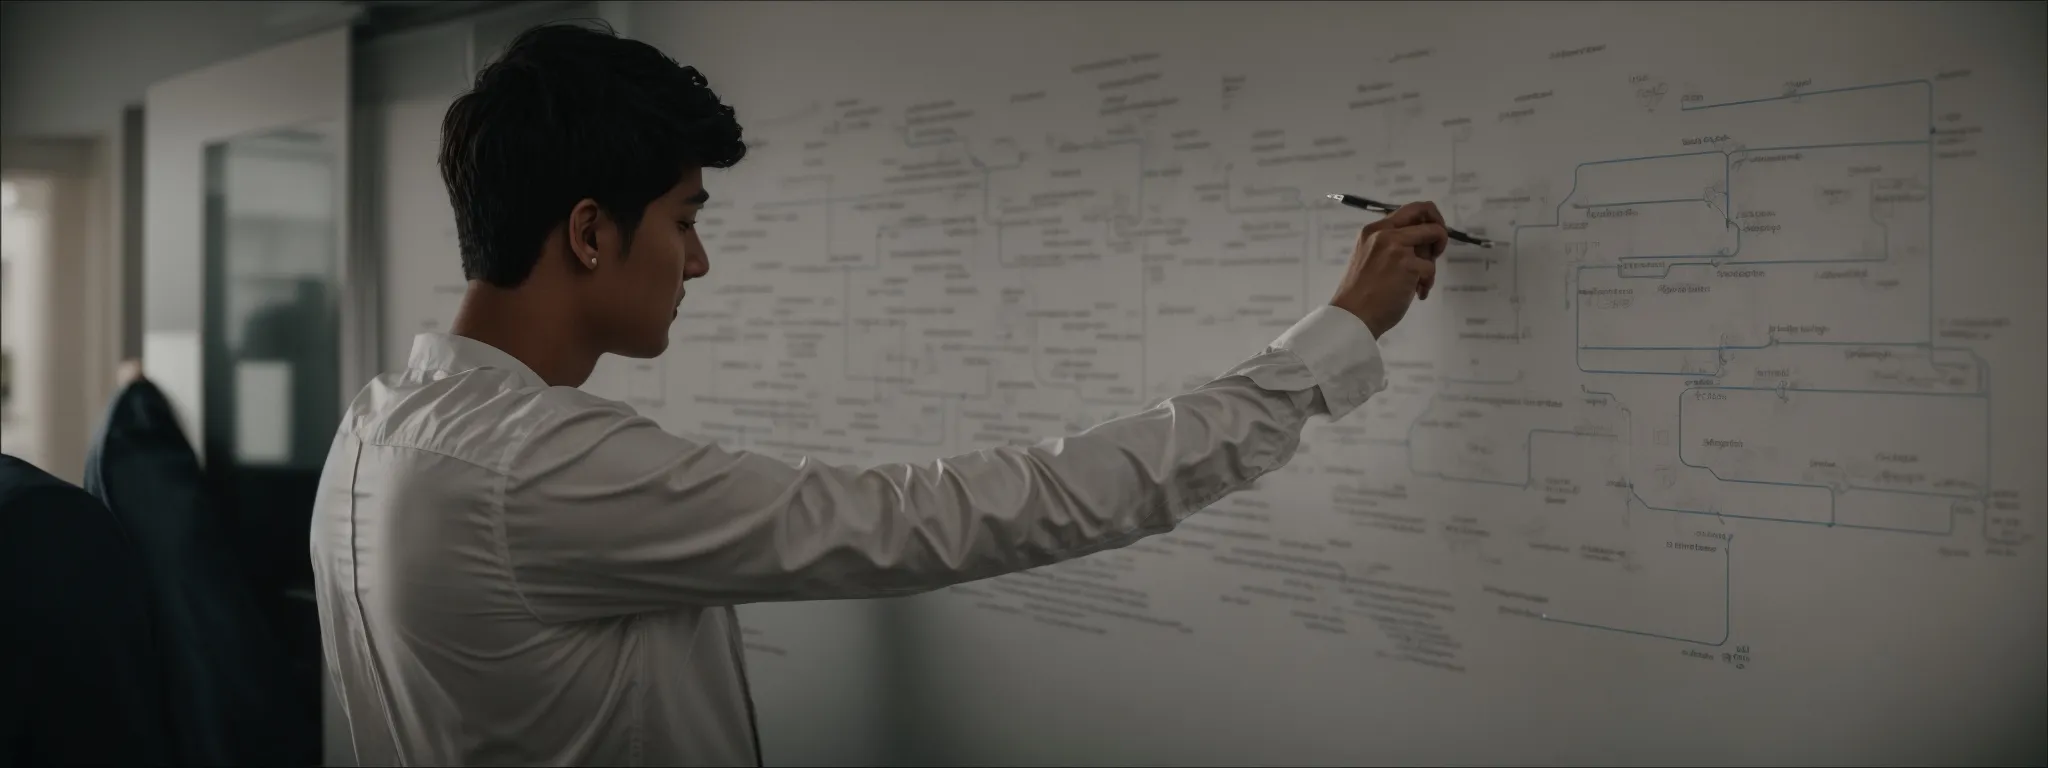 a person studying a complex flowchart on a whiteboard, illustrating search engine algorithms.